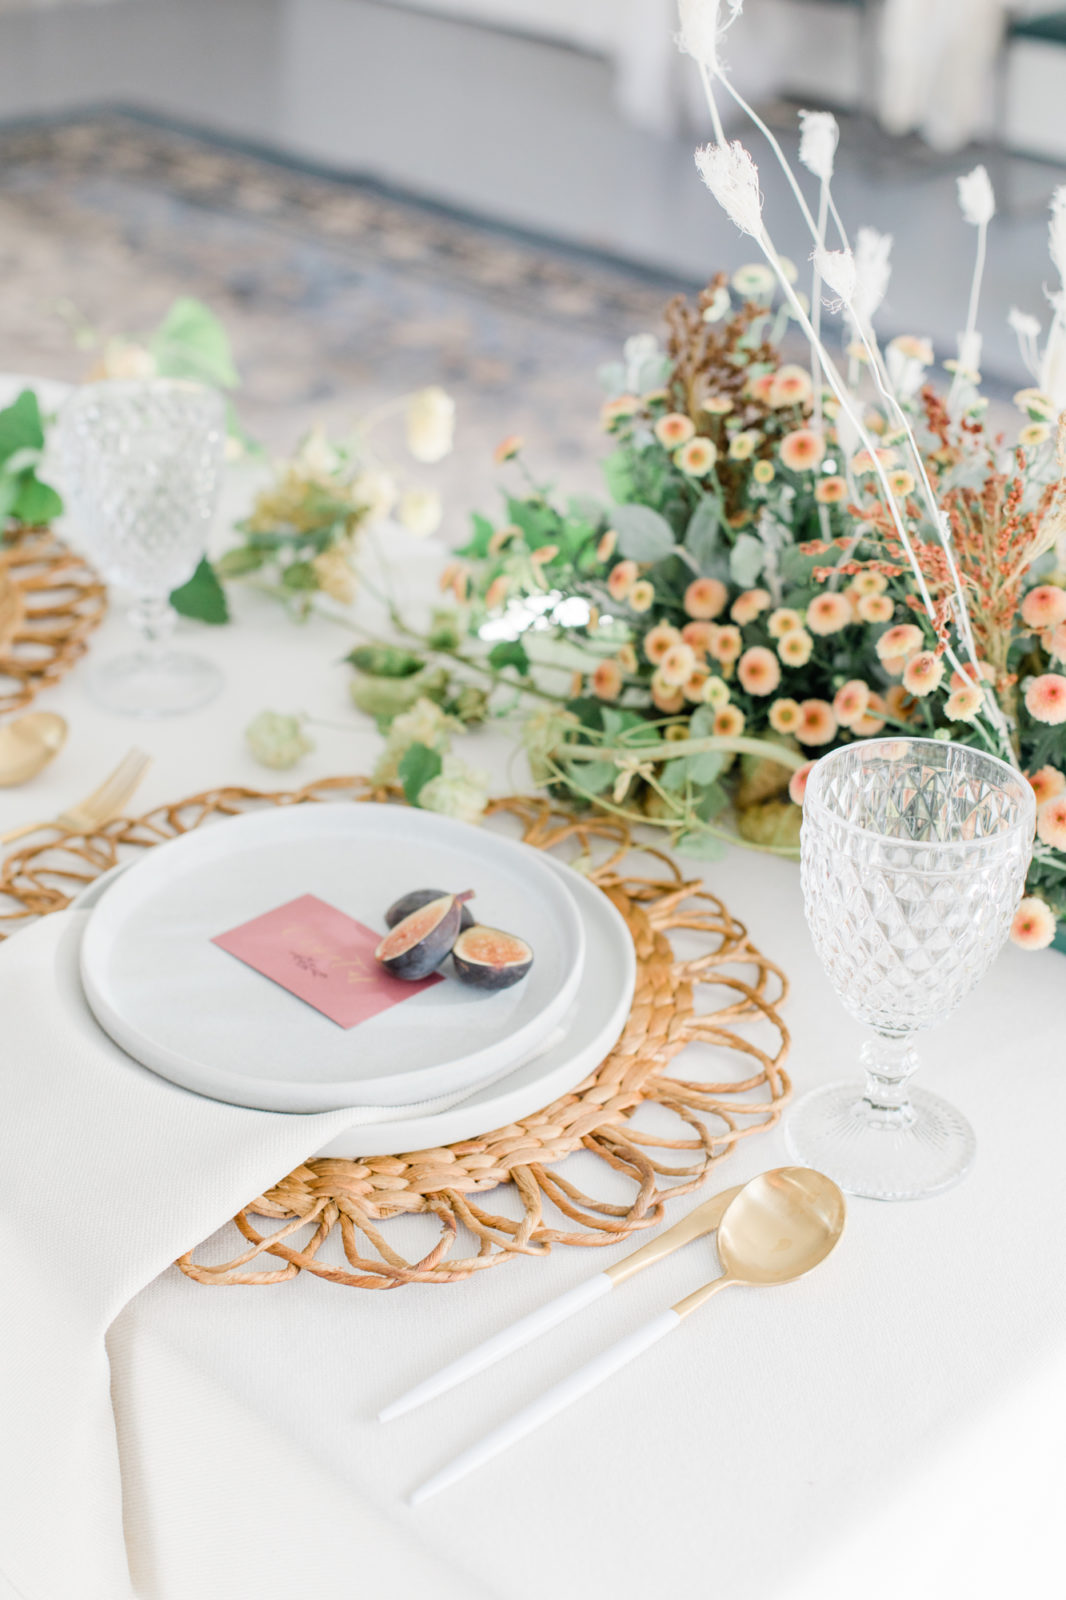 Figs, Whimsical Florals and Honey Accents in This Secluded Backyard Wedding Inspiration Featured by Brontë Bride